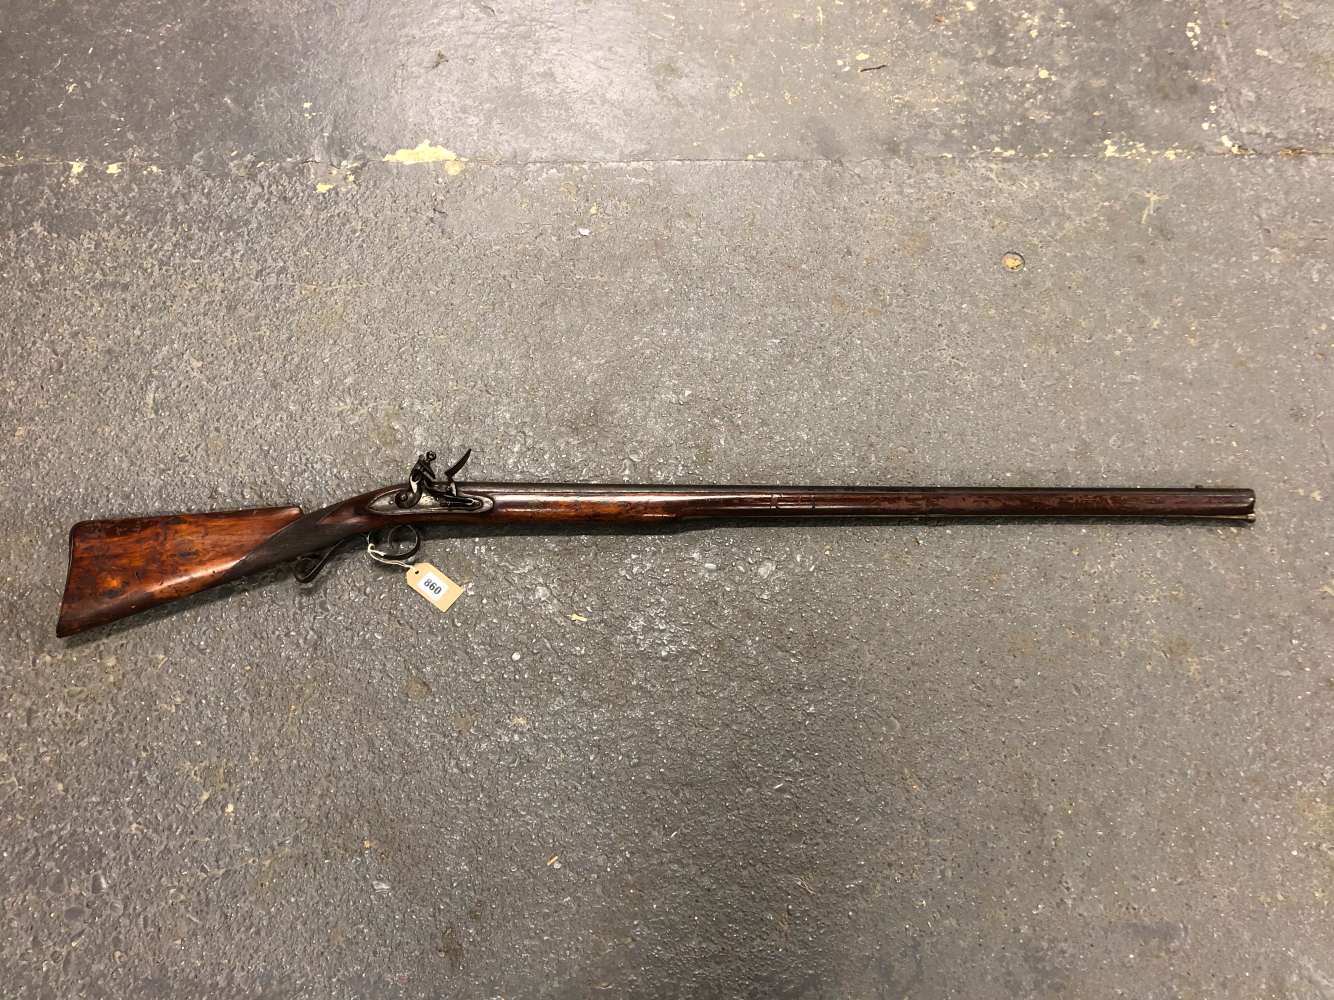 AN EAST INDIA COMPANY FLINTLOCK MUSKET, 39 INCH BARREL, BEVELLED LOCK WITH RAMPANT LION EMBLEM, FULL